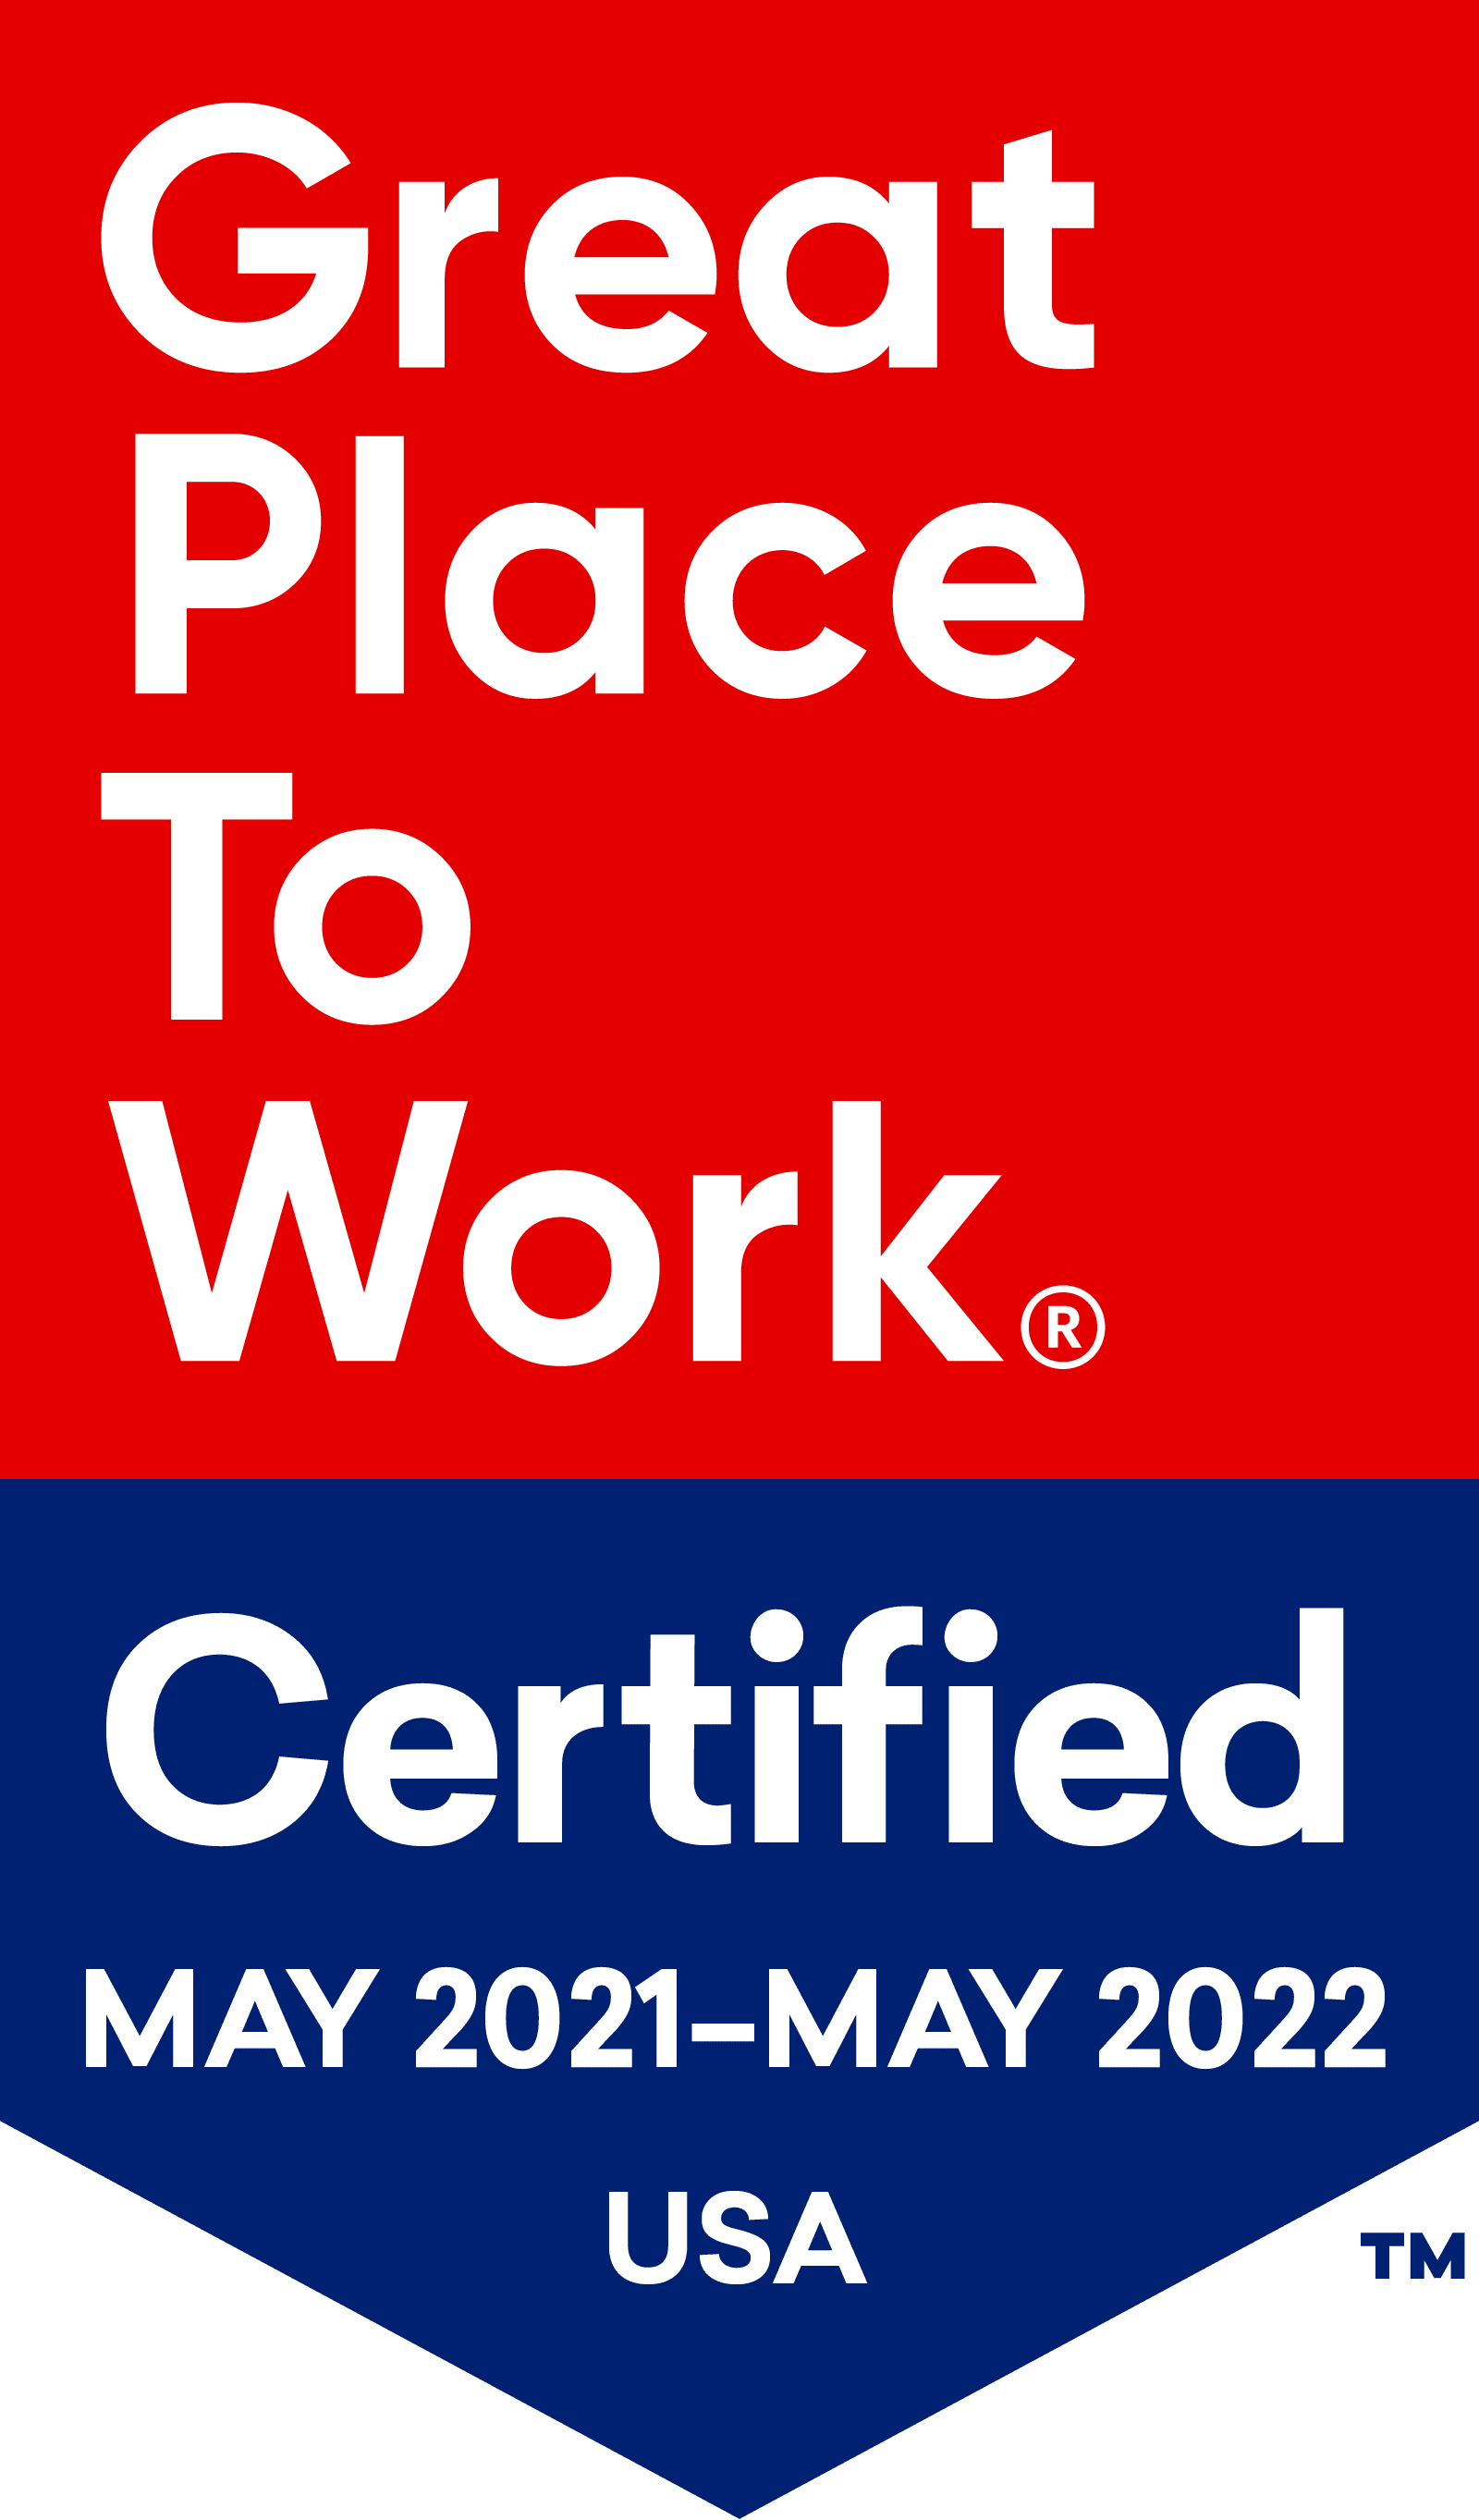 The Commons at Union Ranch is Great Place To Work Certified